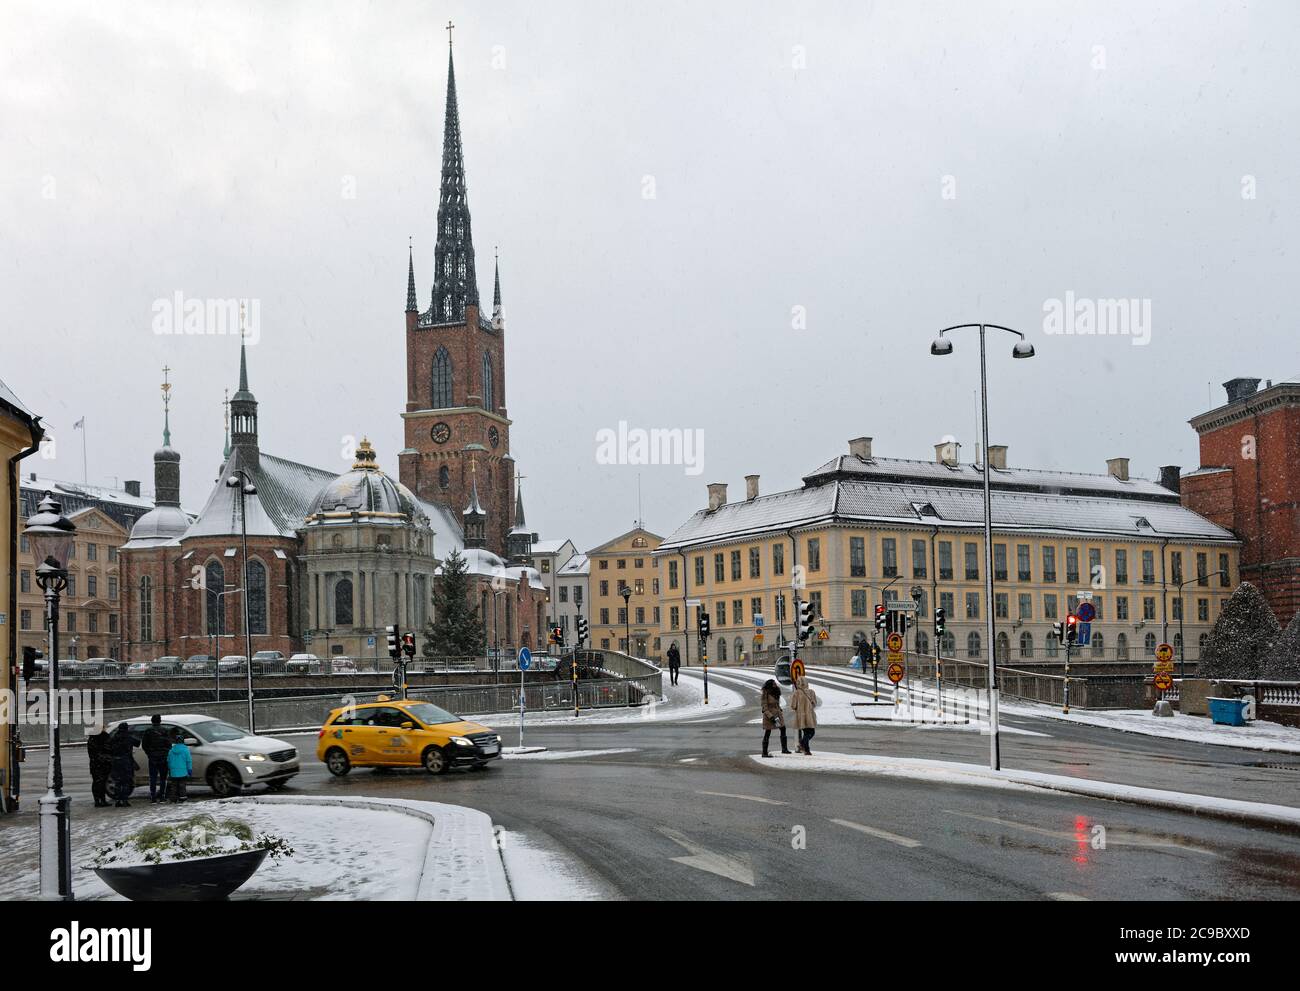 People at the crossroad at Riddarholmsbron bridge against the Riddarholmen Church in Gamla Stan, the historical center of Stockholm, Sweden Stock Photo